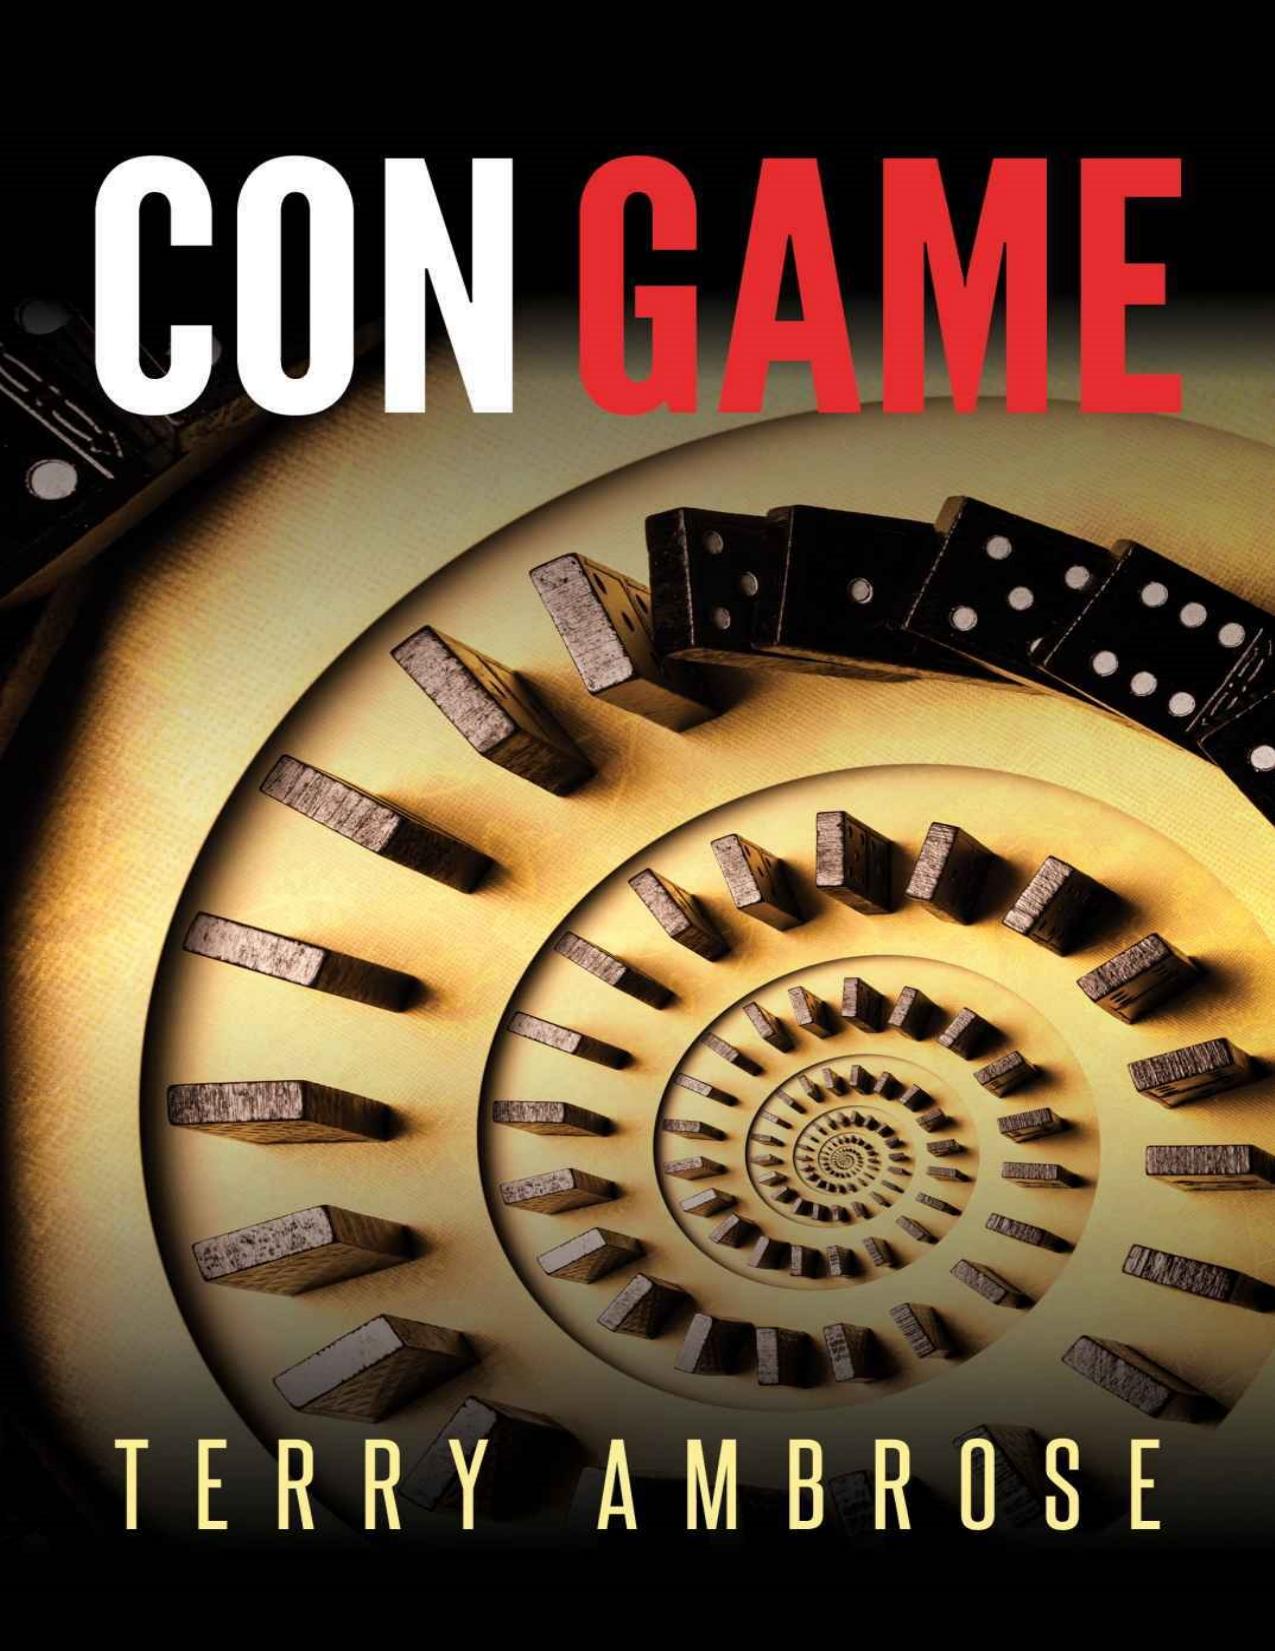 Con Game by Terry Ambrose